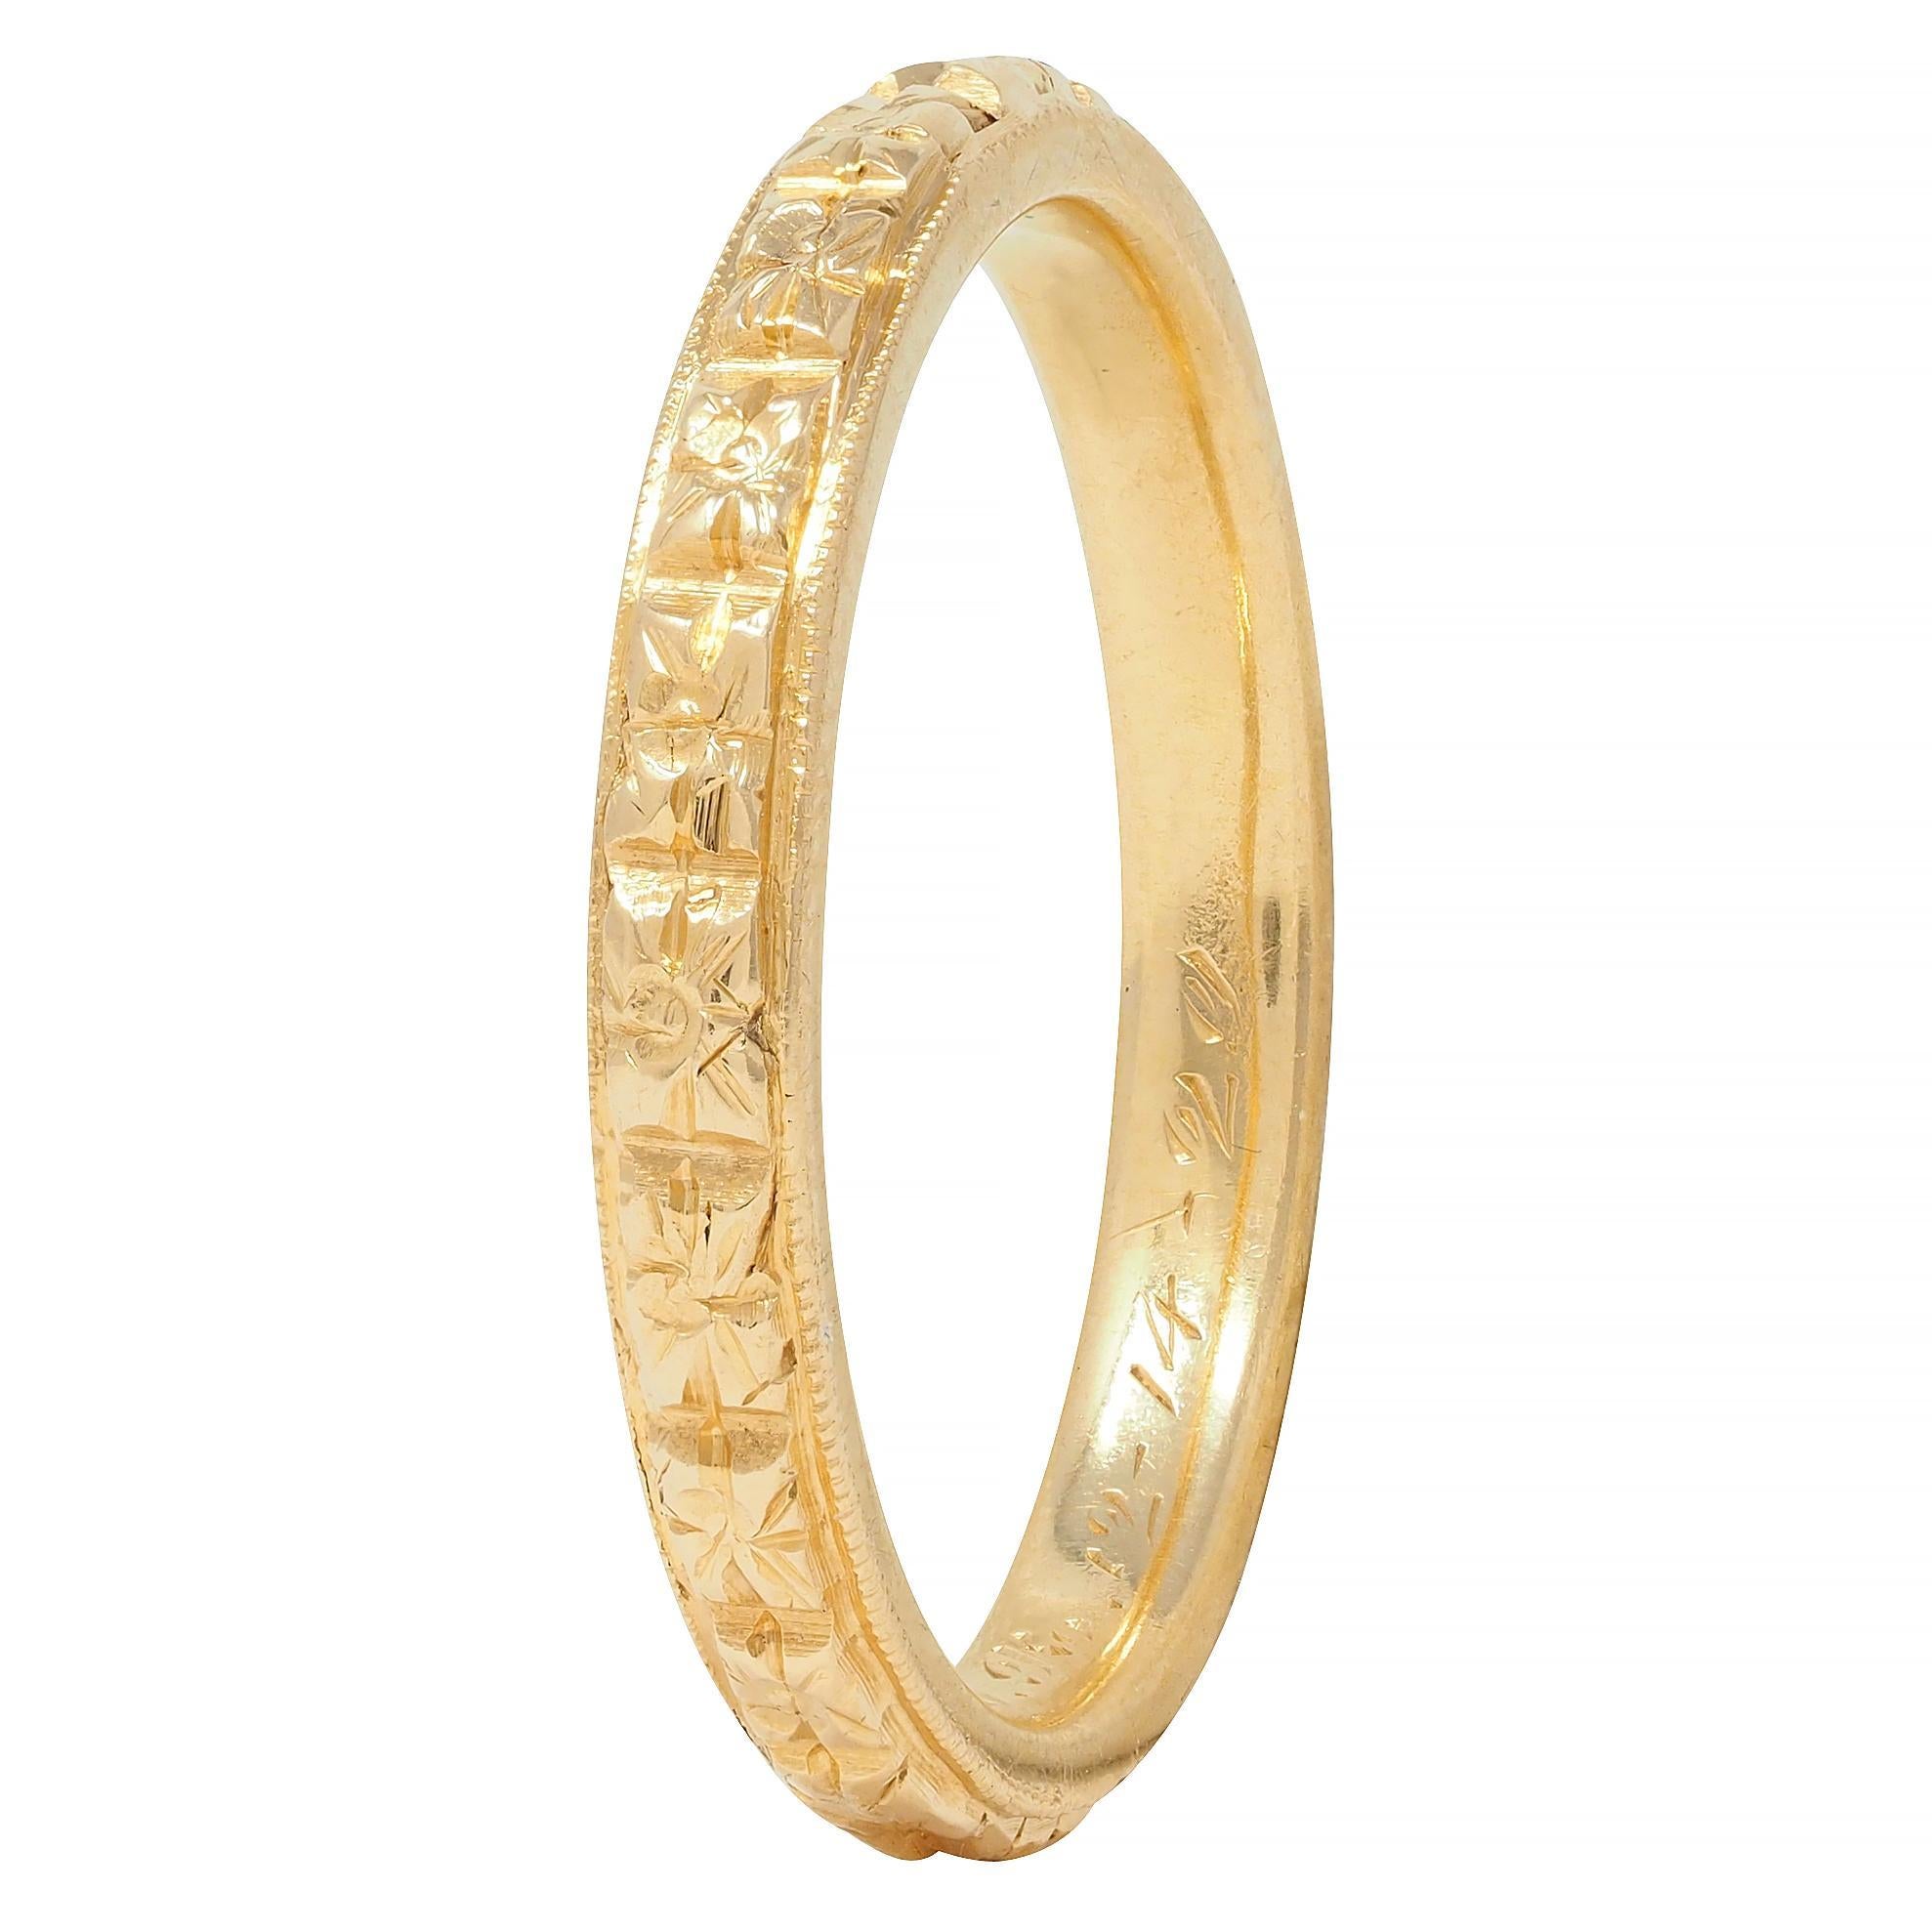 Designed as a band ring with a raised orange blossom motif fully around
With milgrain detail edges and engraved details
Inscribed 'E.D.W. to M.O.B. 12-14-29'
Stamped for 18 karat gold
With maker's mark
Circa: 1920's; via dated inscription 
Ring